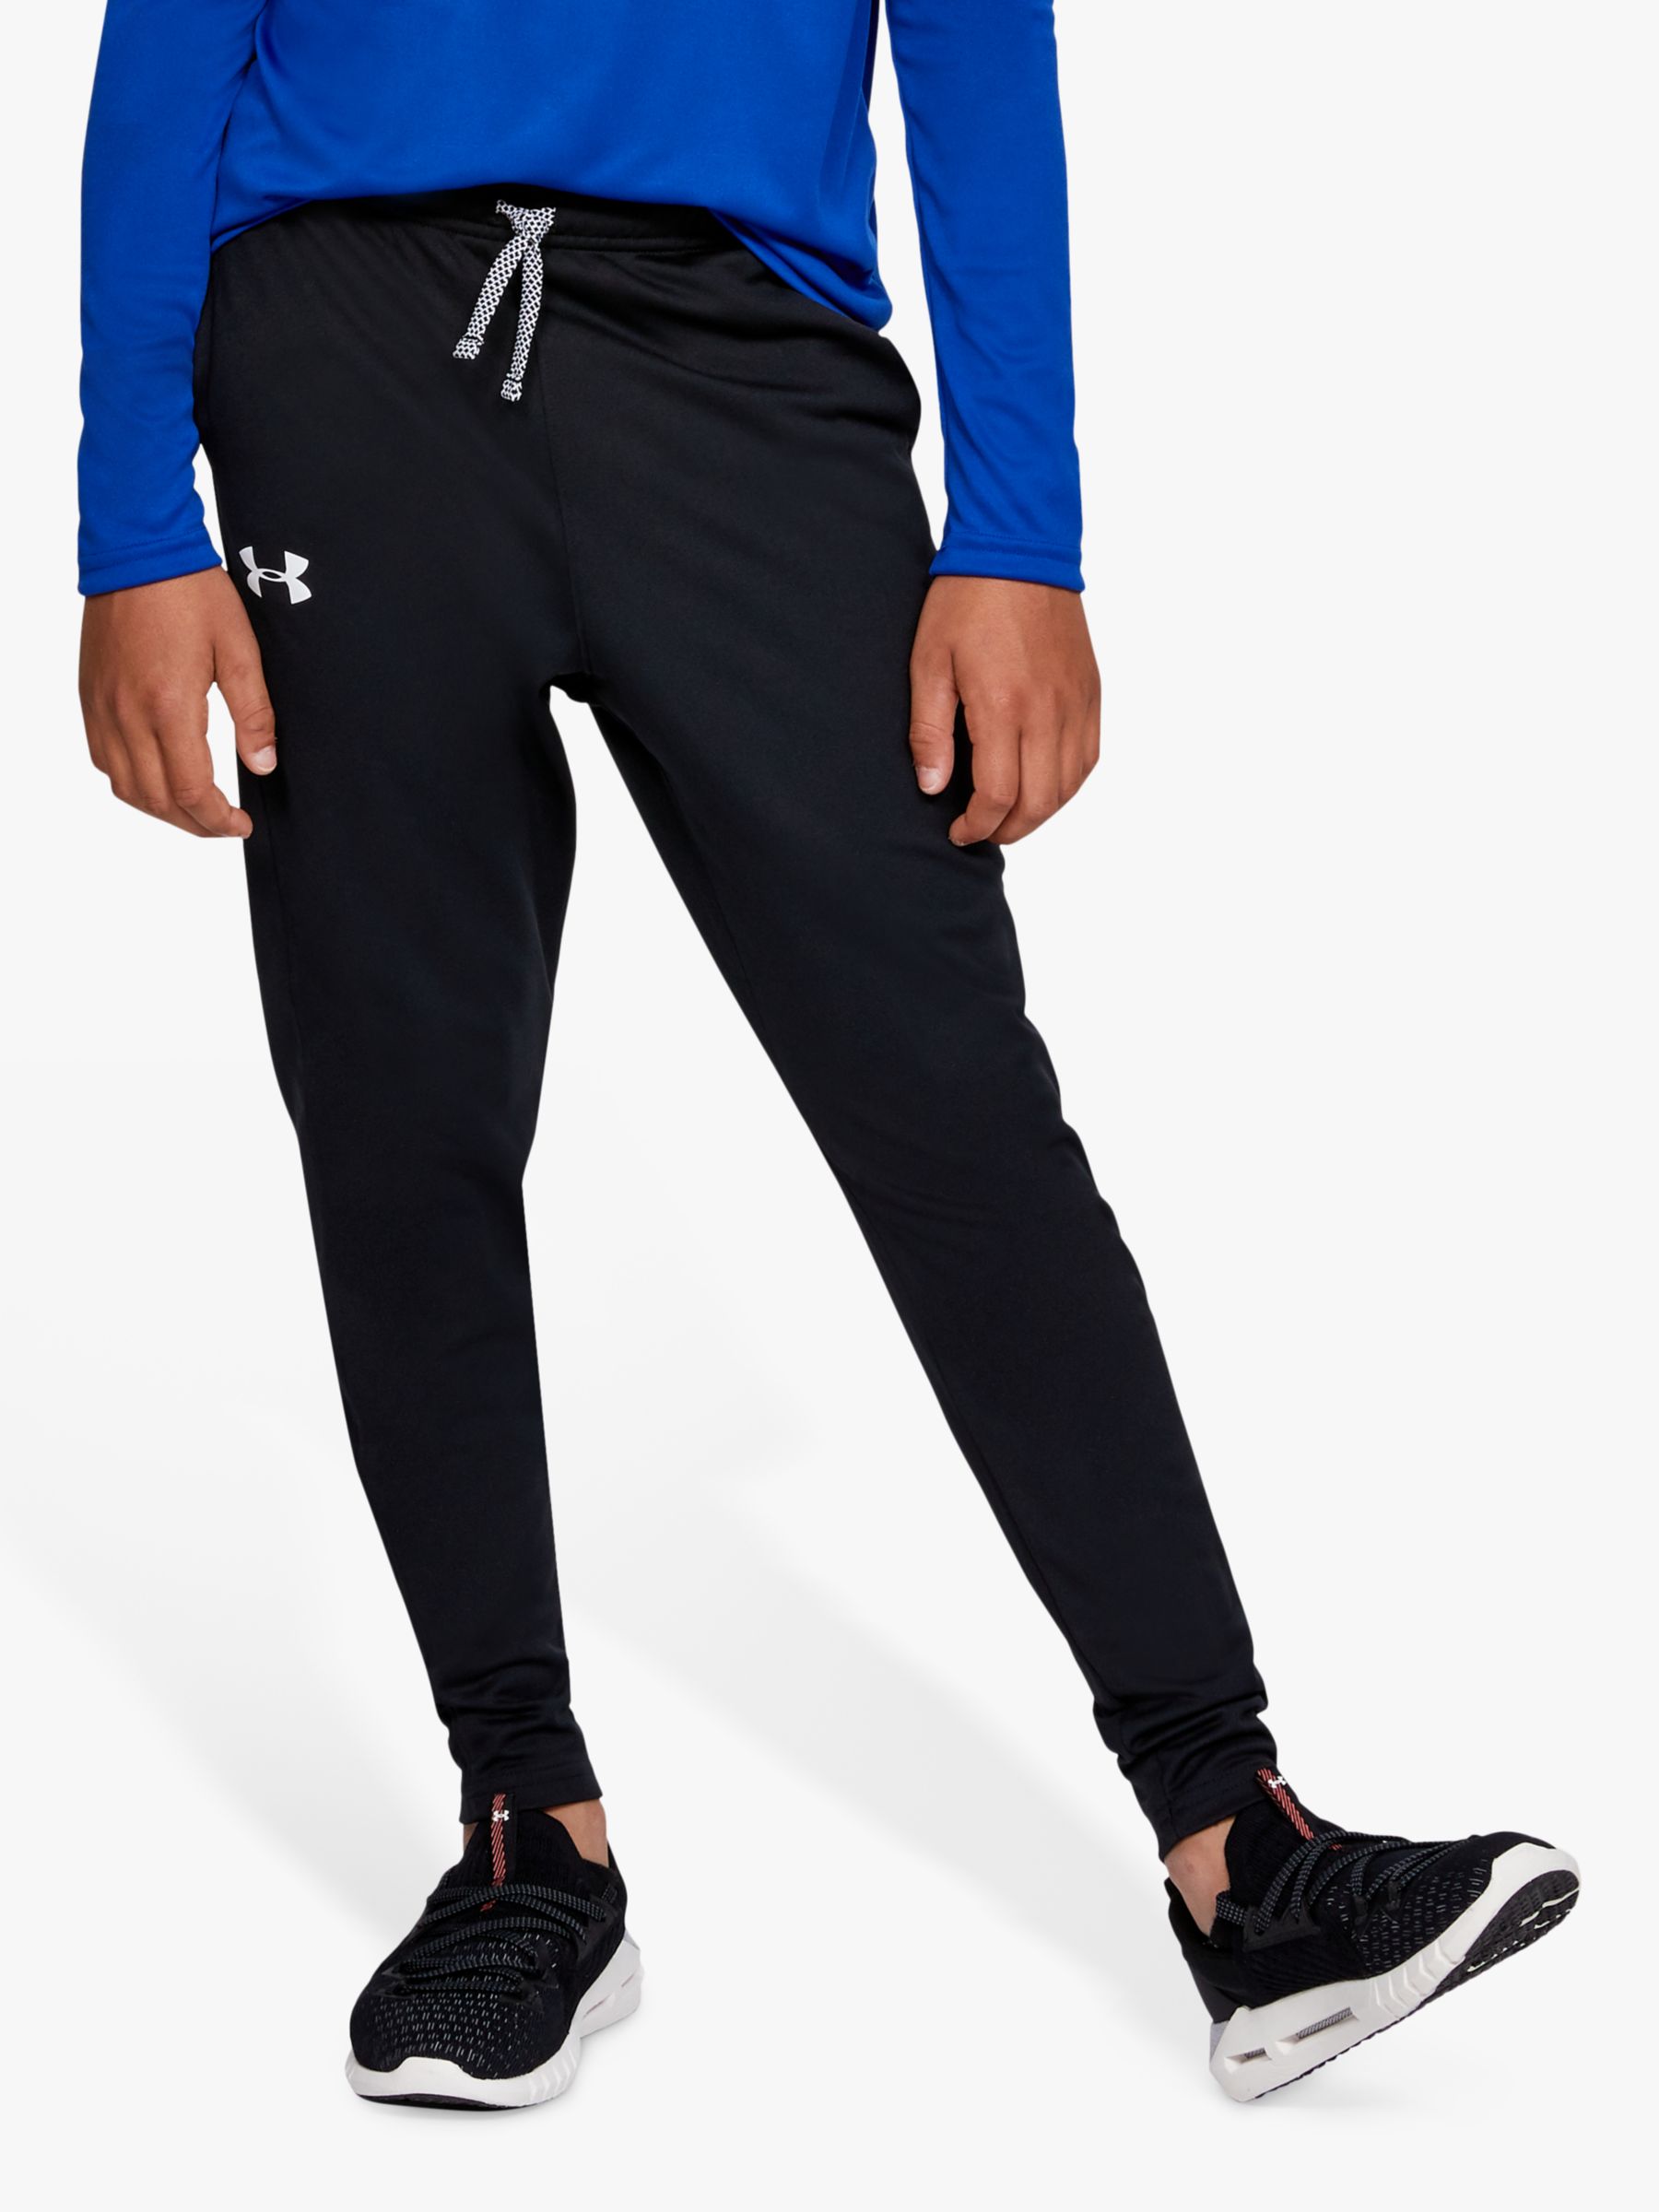 Image of Under Armour Boys Brawler 20 Tapered Tracksuit Bottoms Black